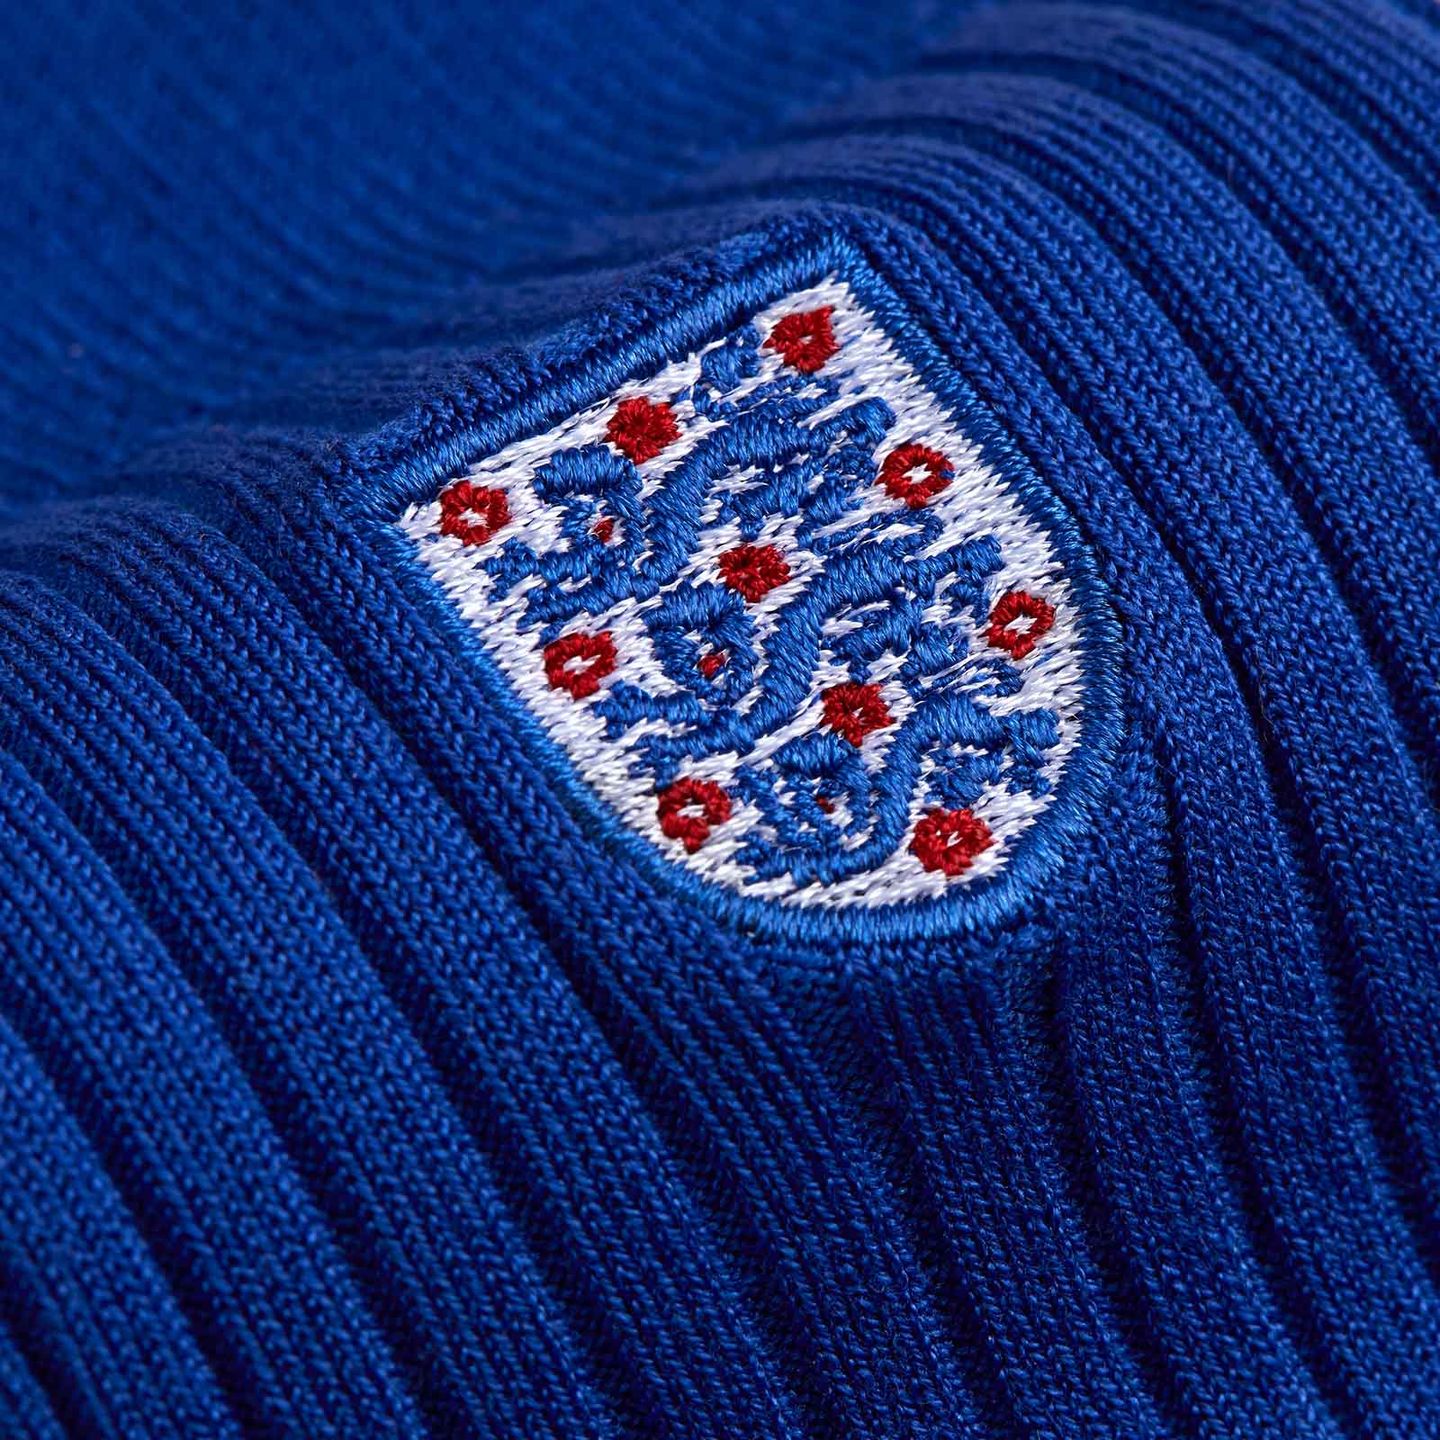 A pair of England socks in blue